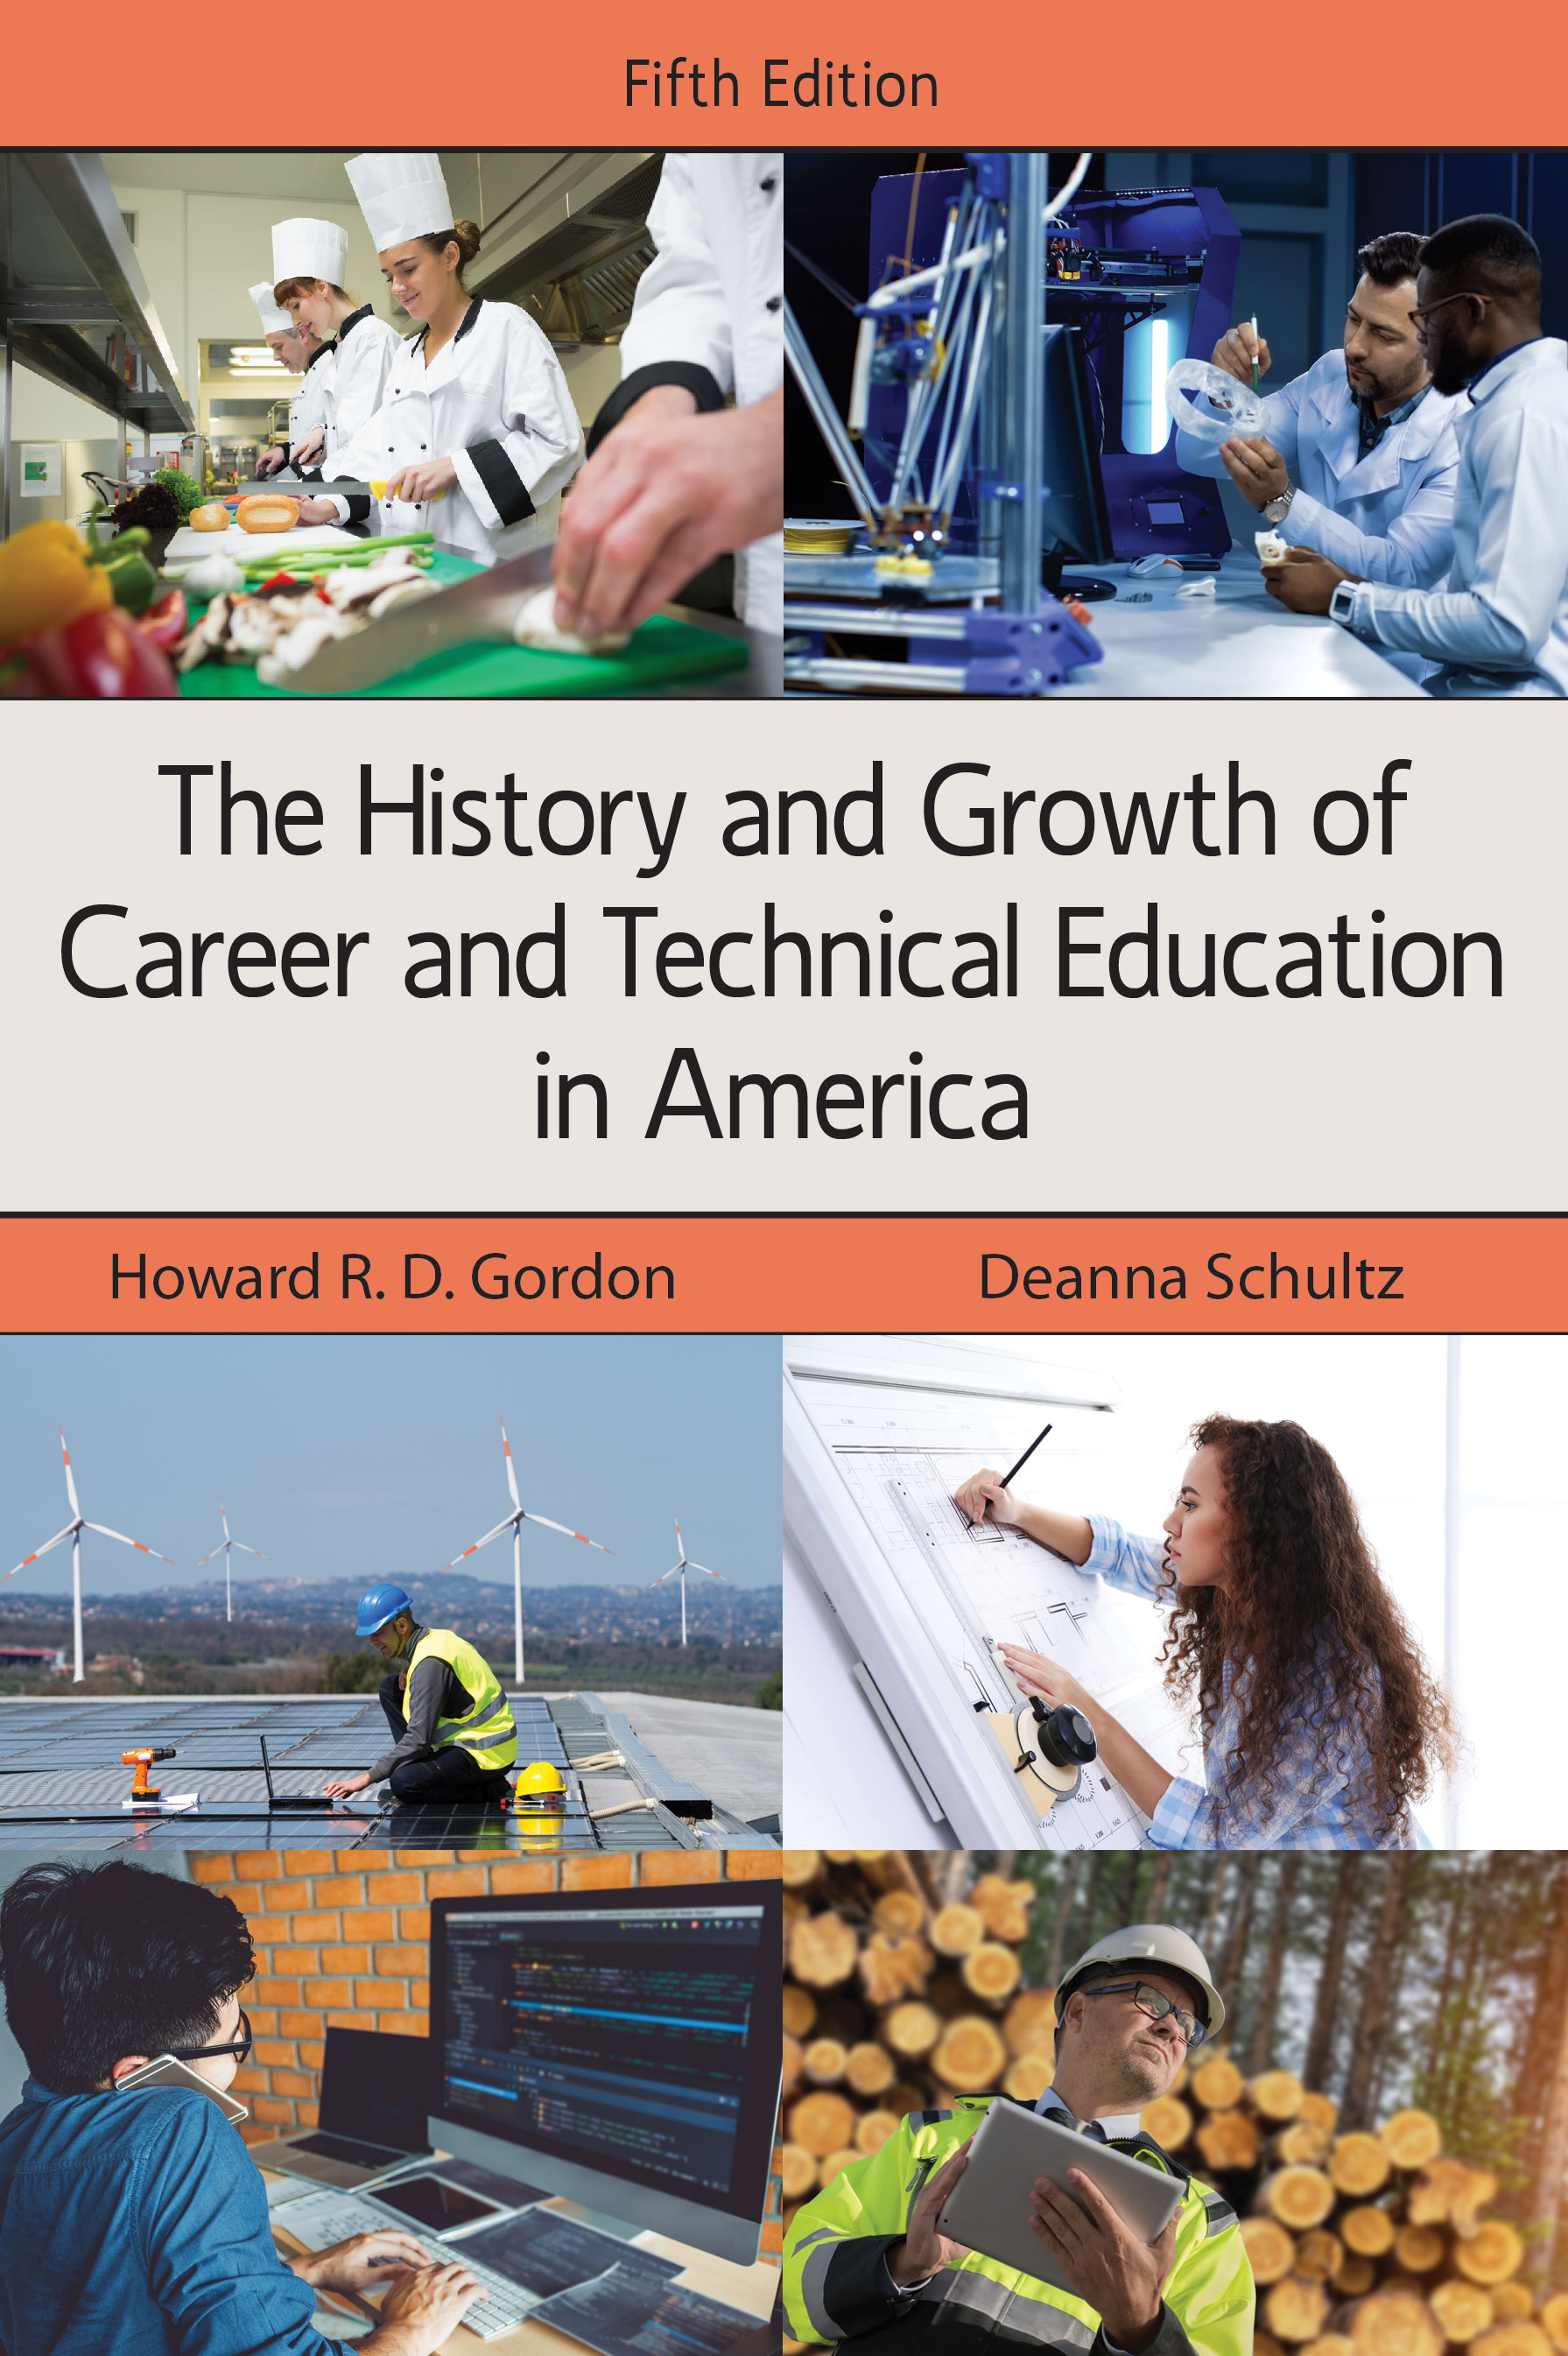 The History and Growth of Career and Technical Education in America: Fifth Edition by Howard R. D. Gordon, Deanna  Schultz